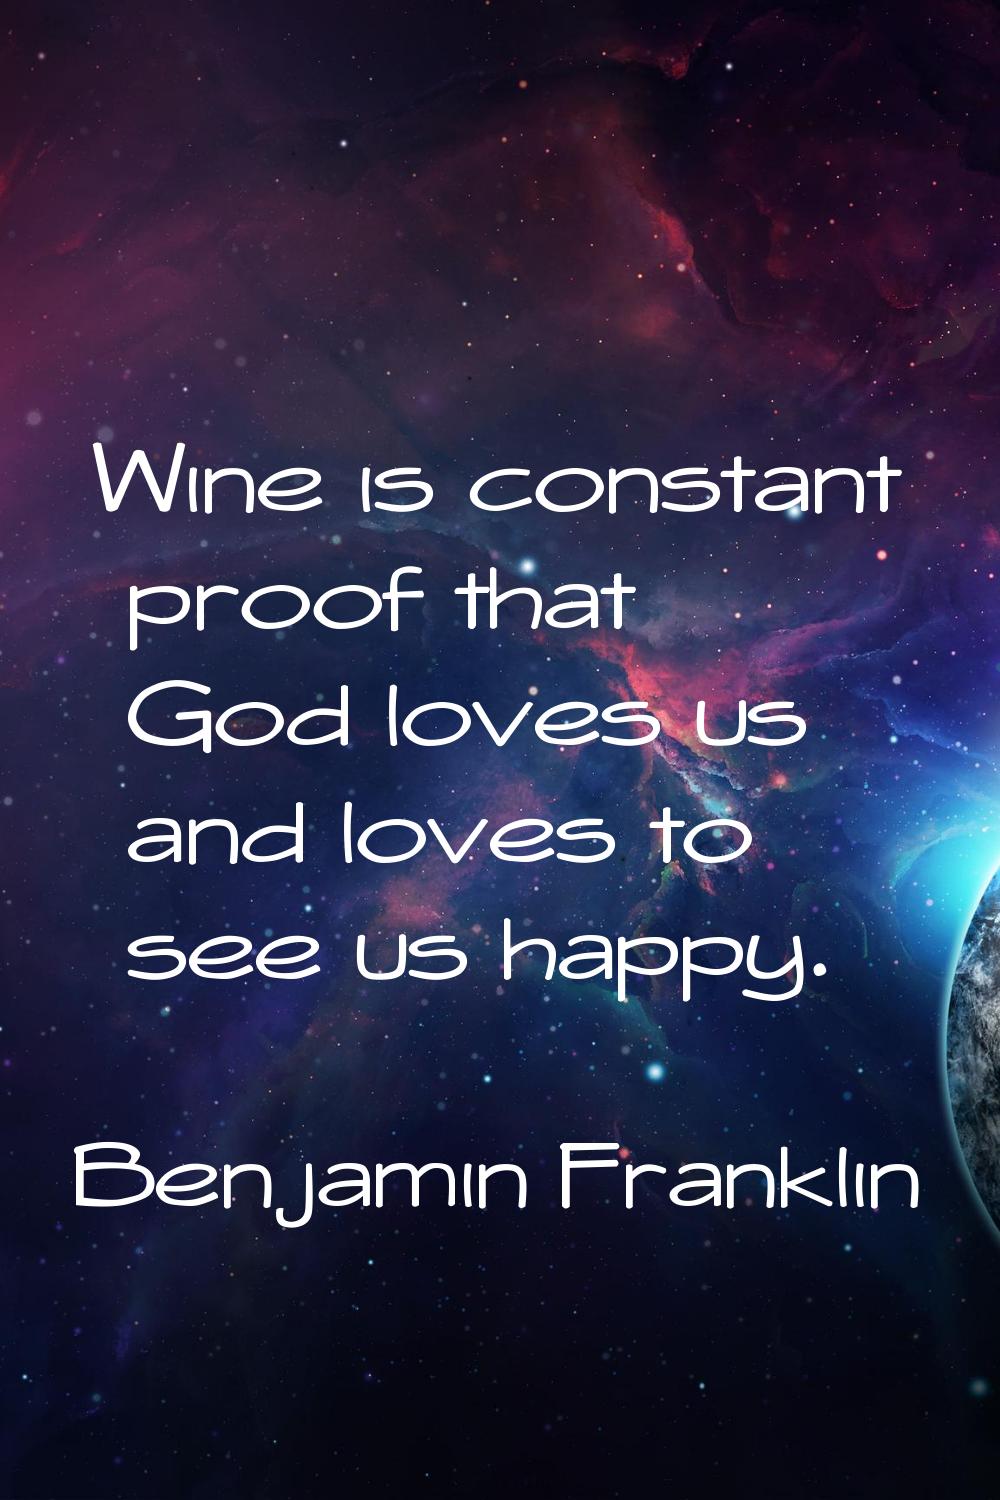 Wine is constant proof that God loves us and loves to see us happy.